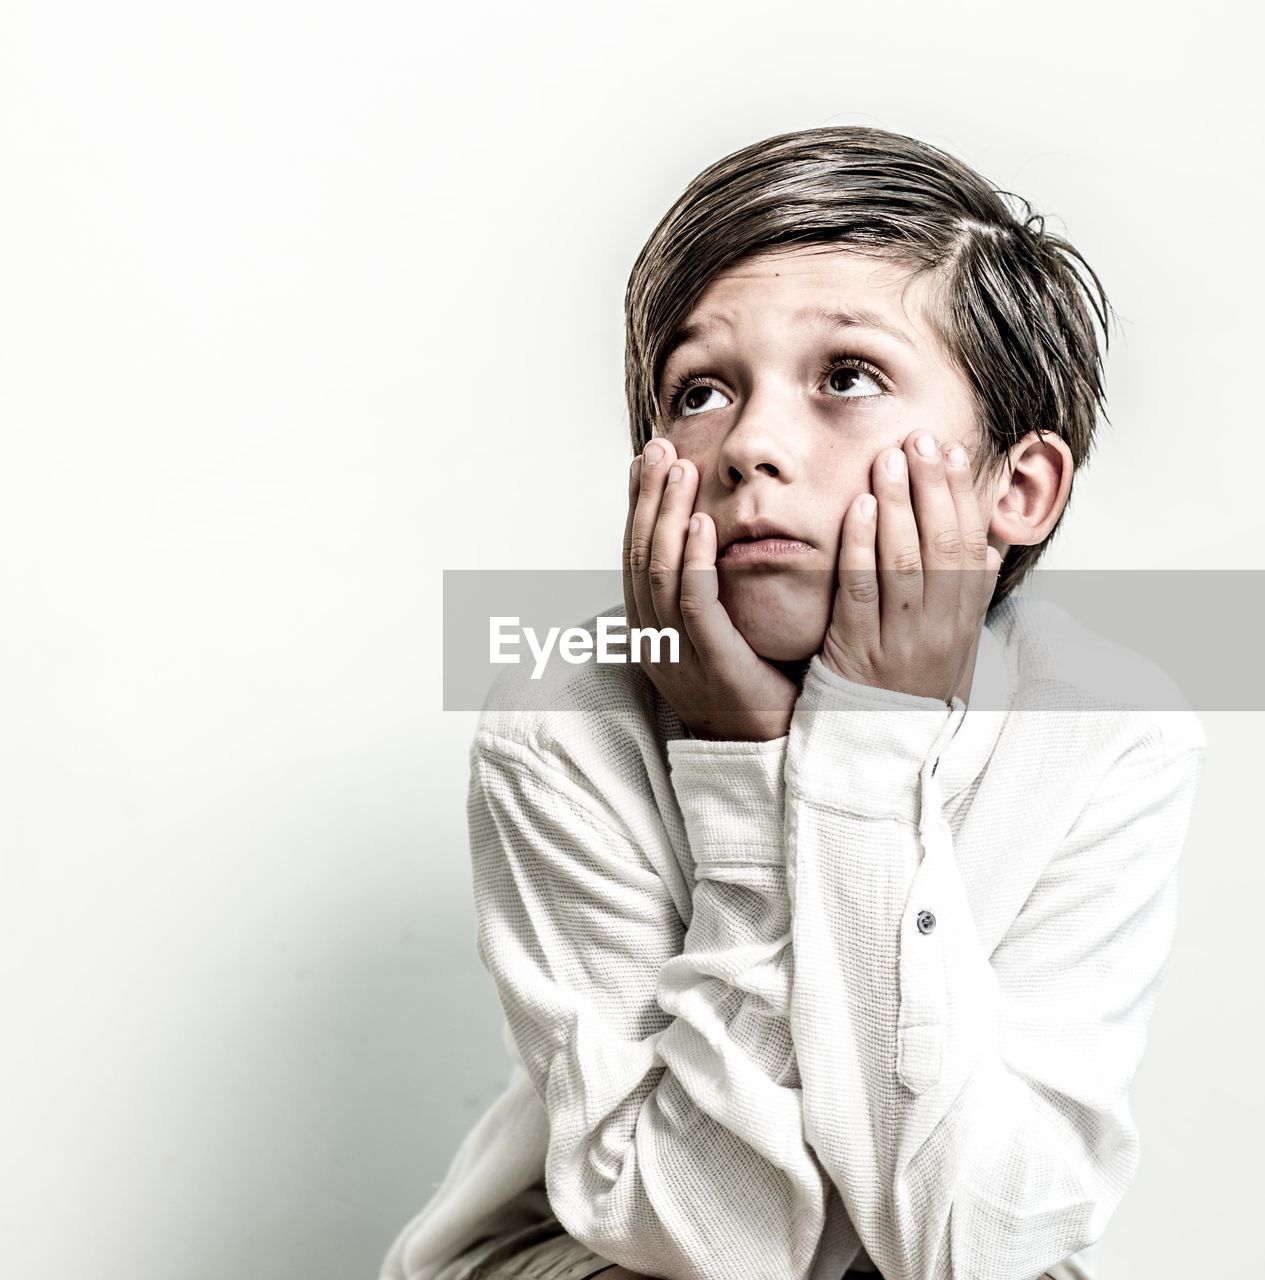 Boy looking away against white background